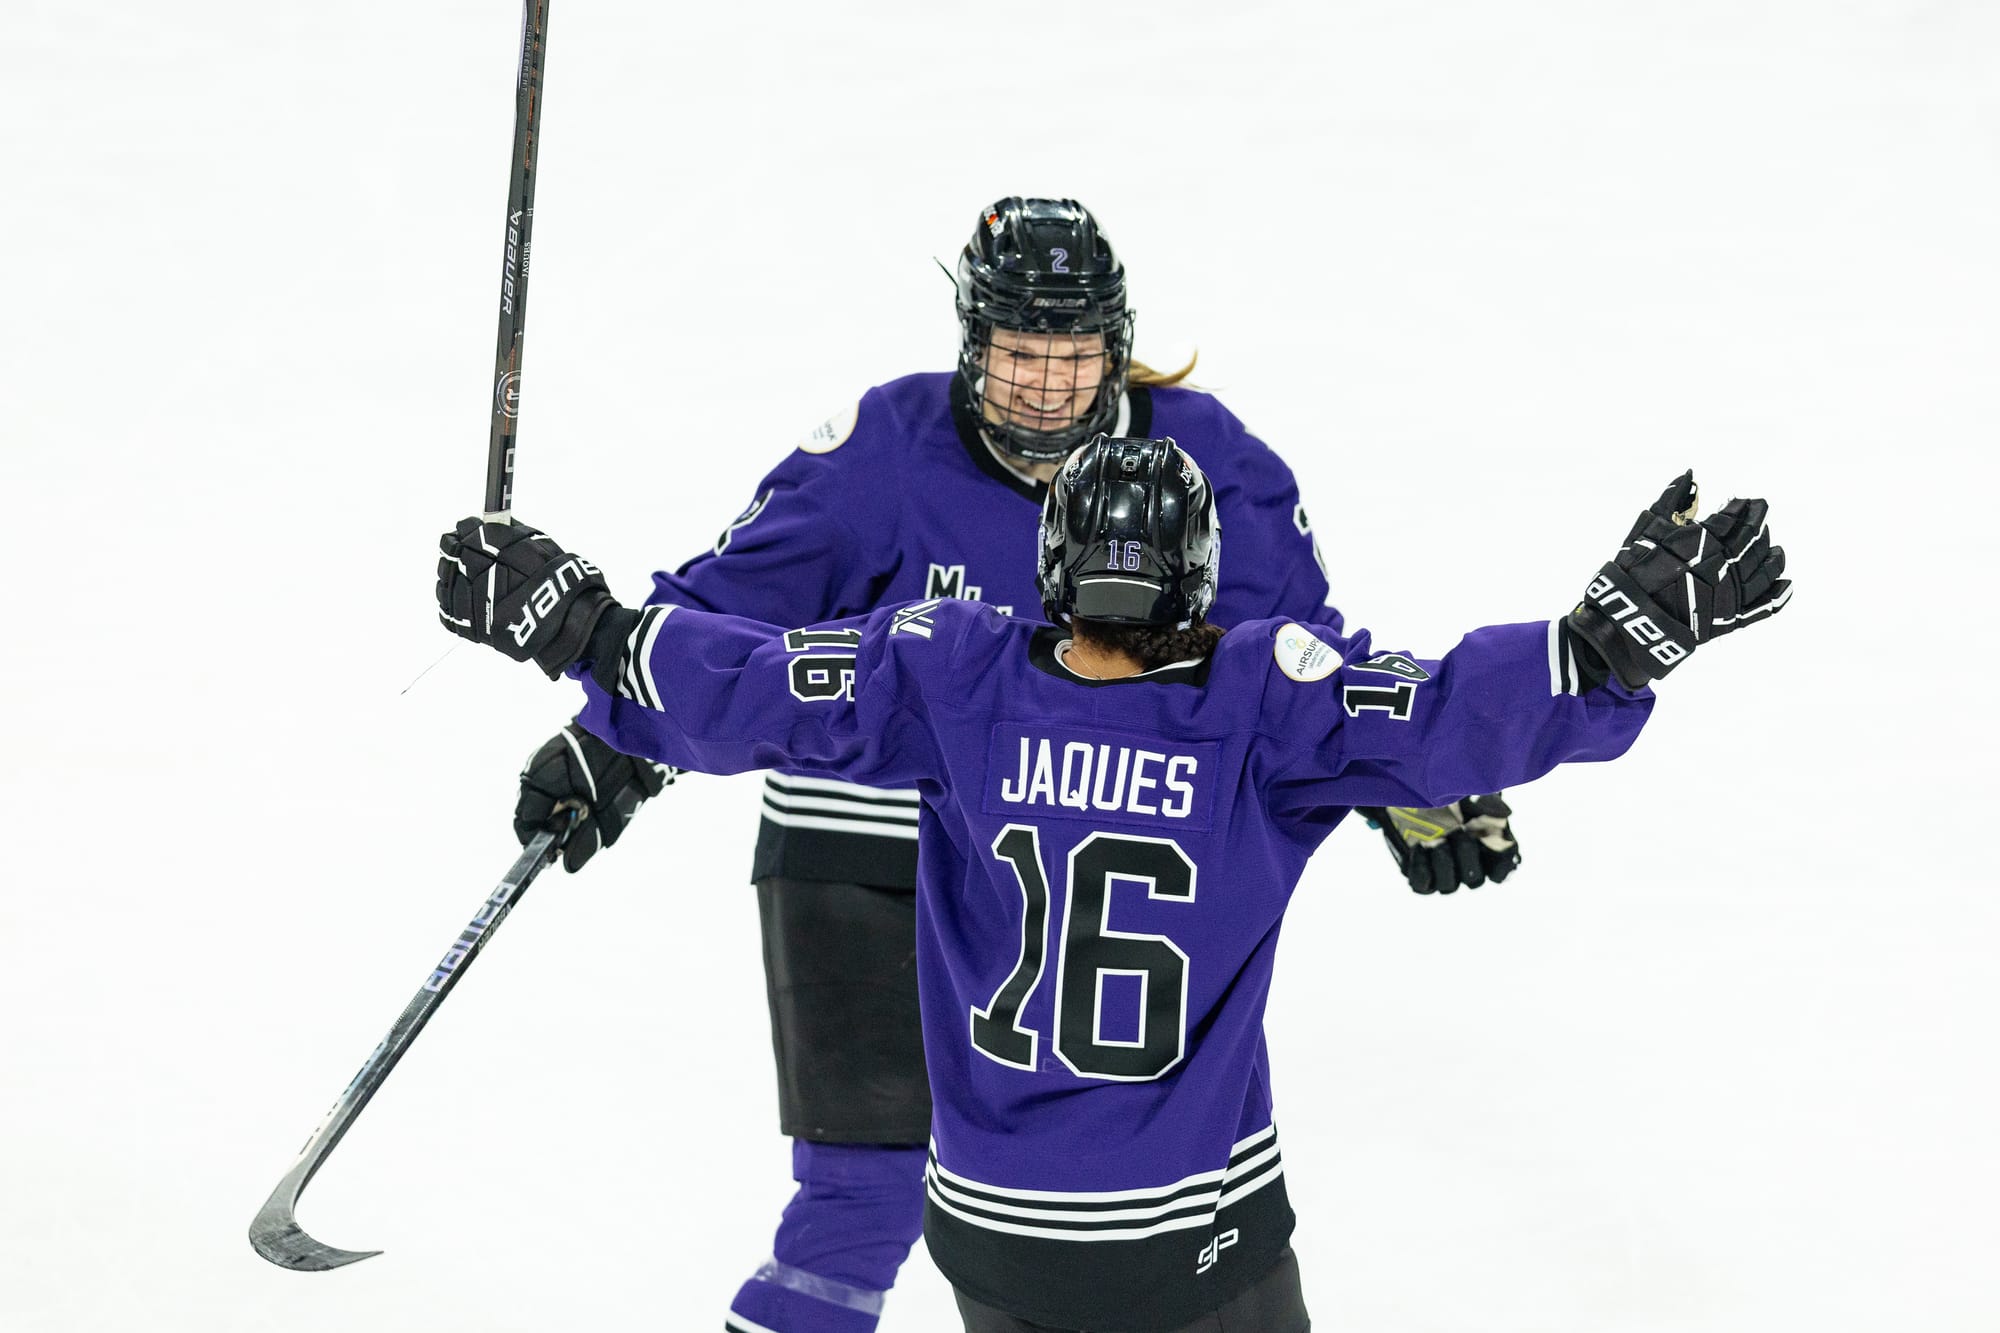 Sophie Jaques celebrates one of her goals against Toronto with Lee Stecklein. Jaques has her arms up and open, waiting for Stecklein to arrive for a hug. Both are in their purple home uniforms.